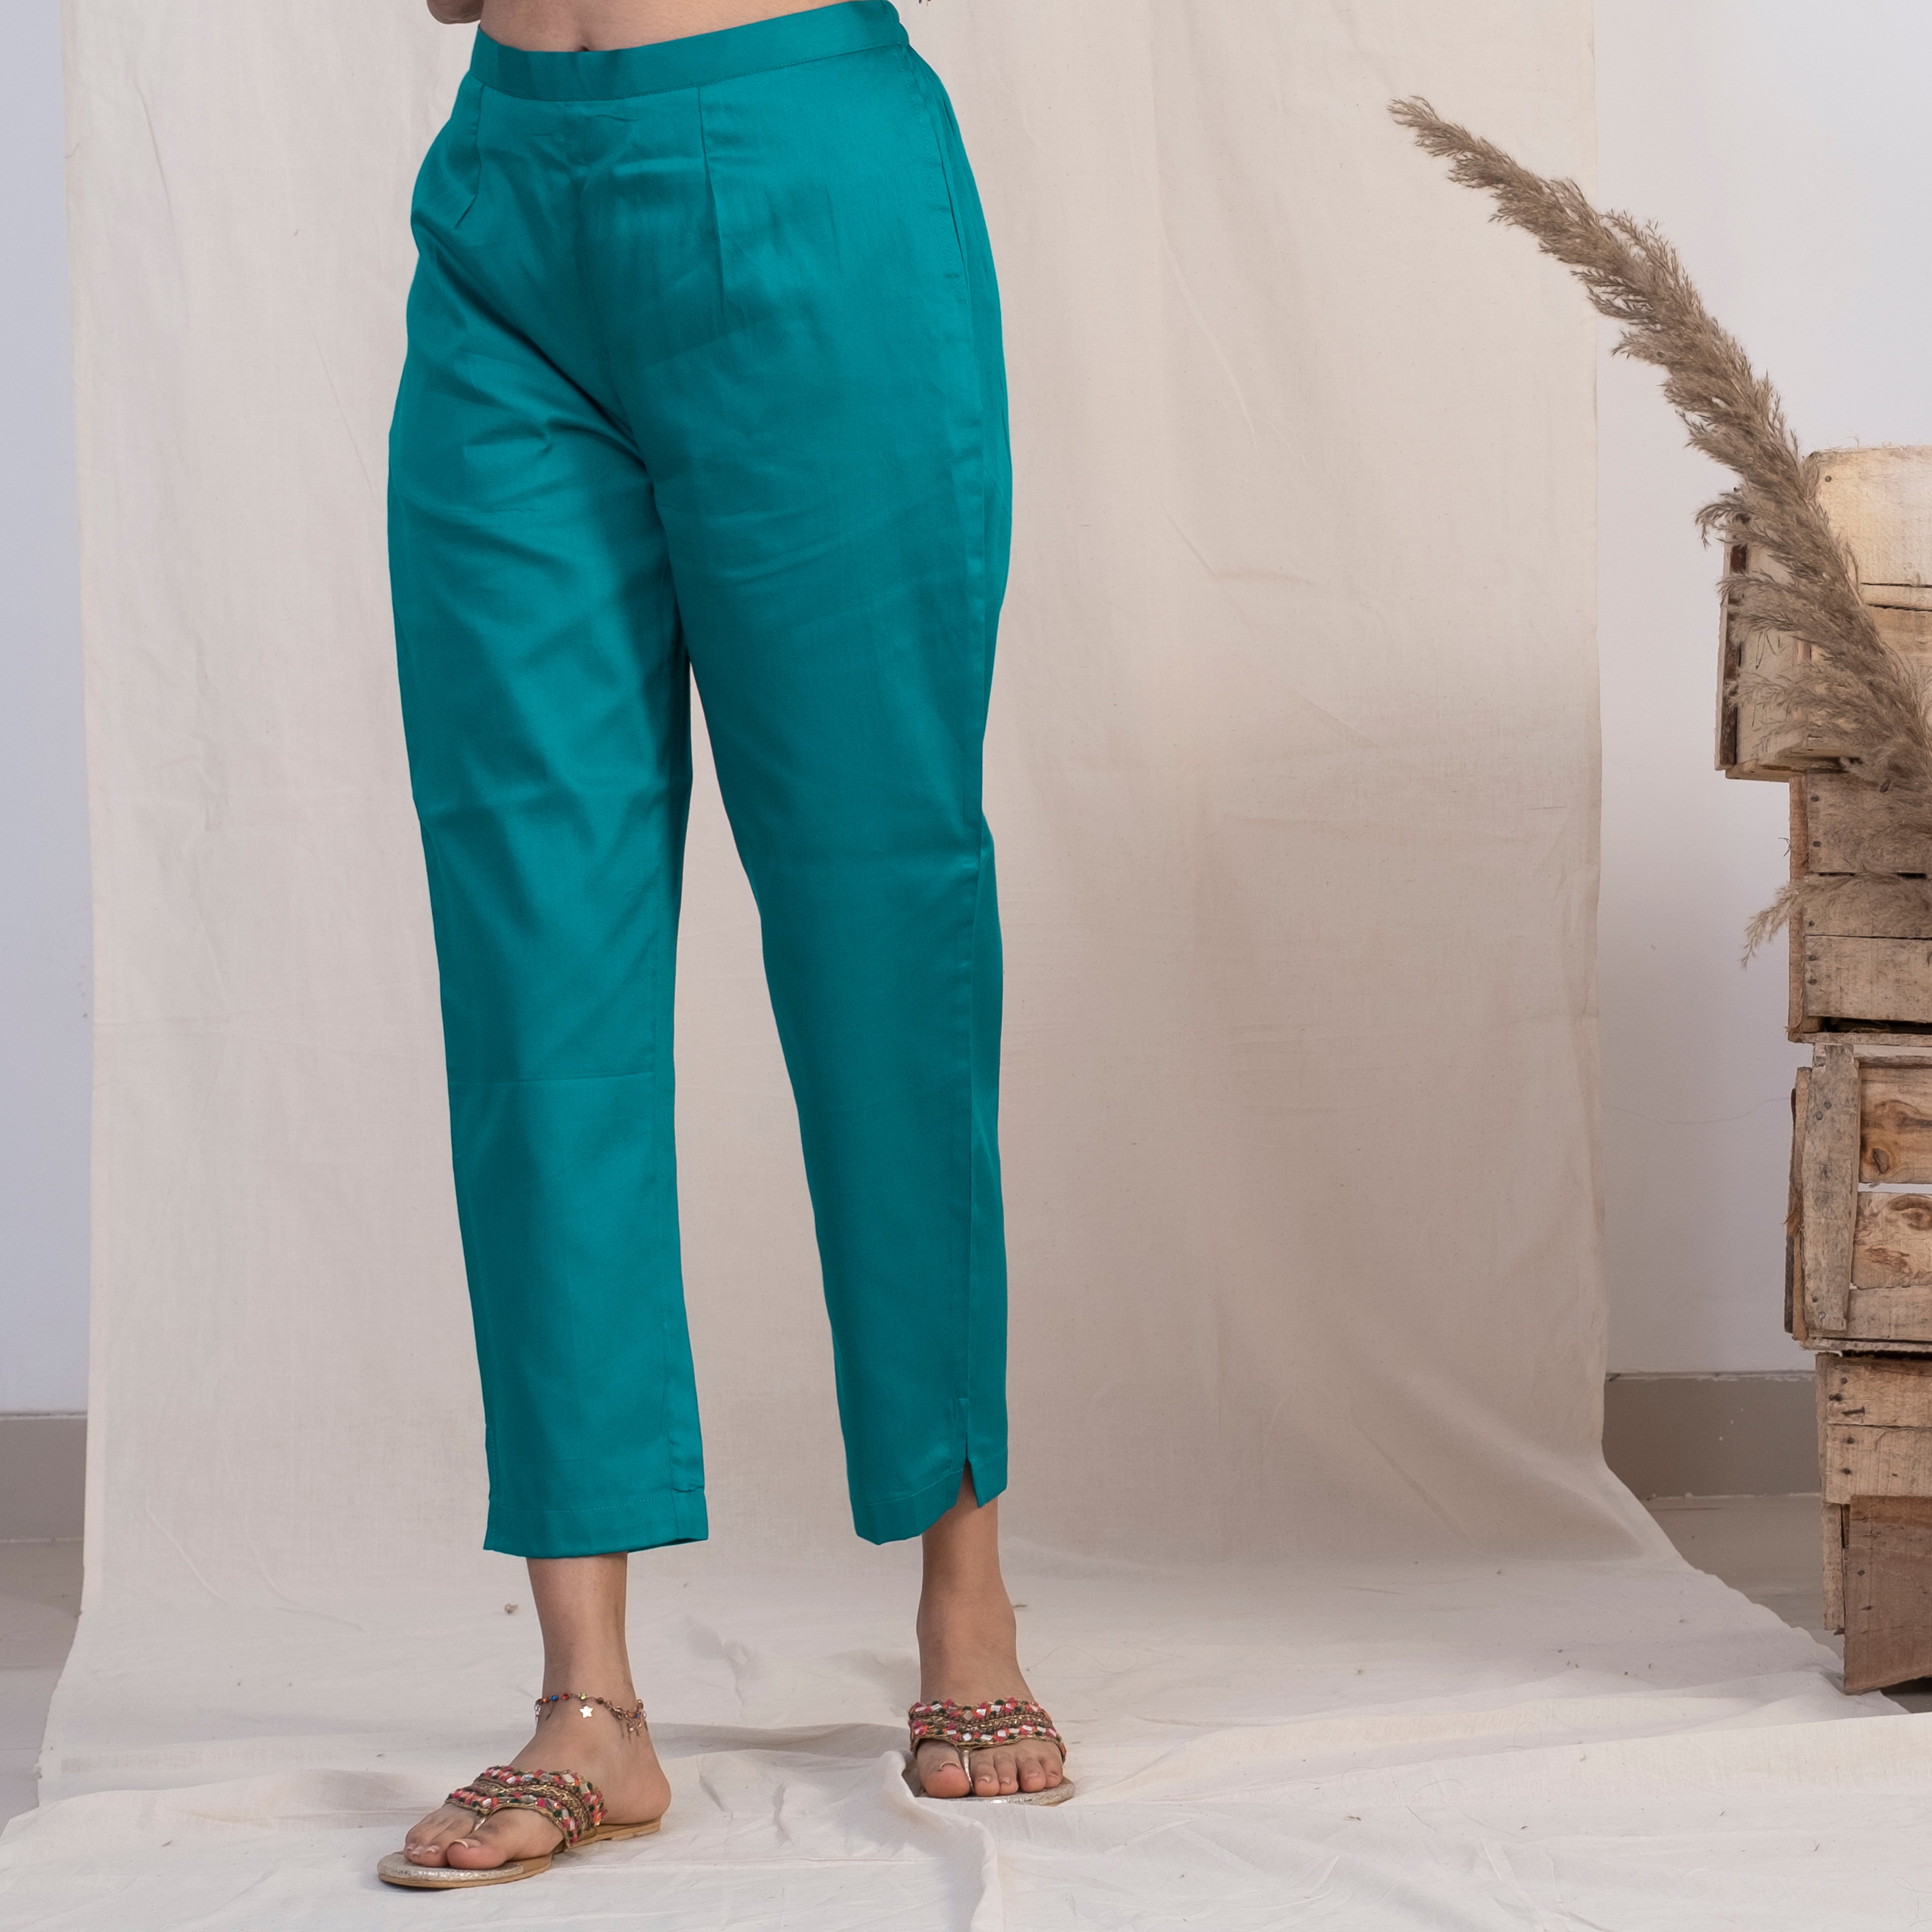 Top Trouser Patterns - The Fold Line